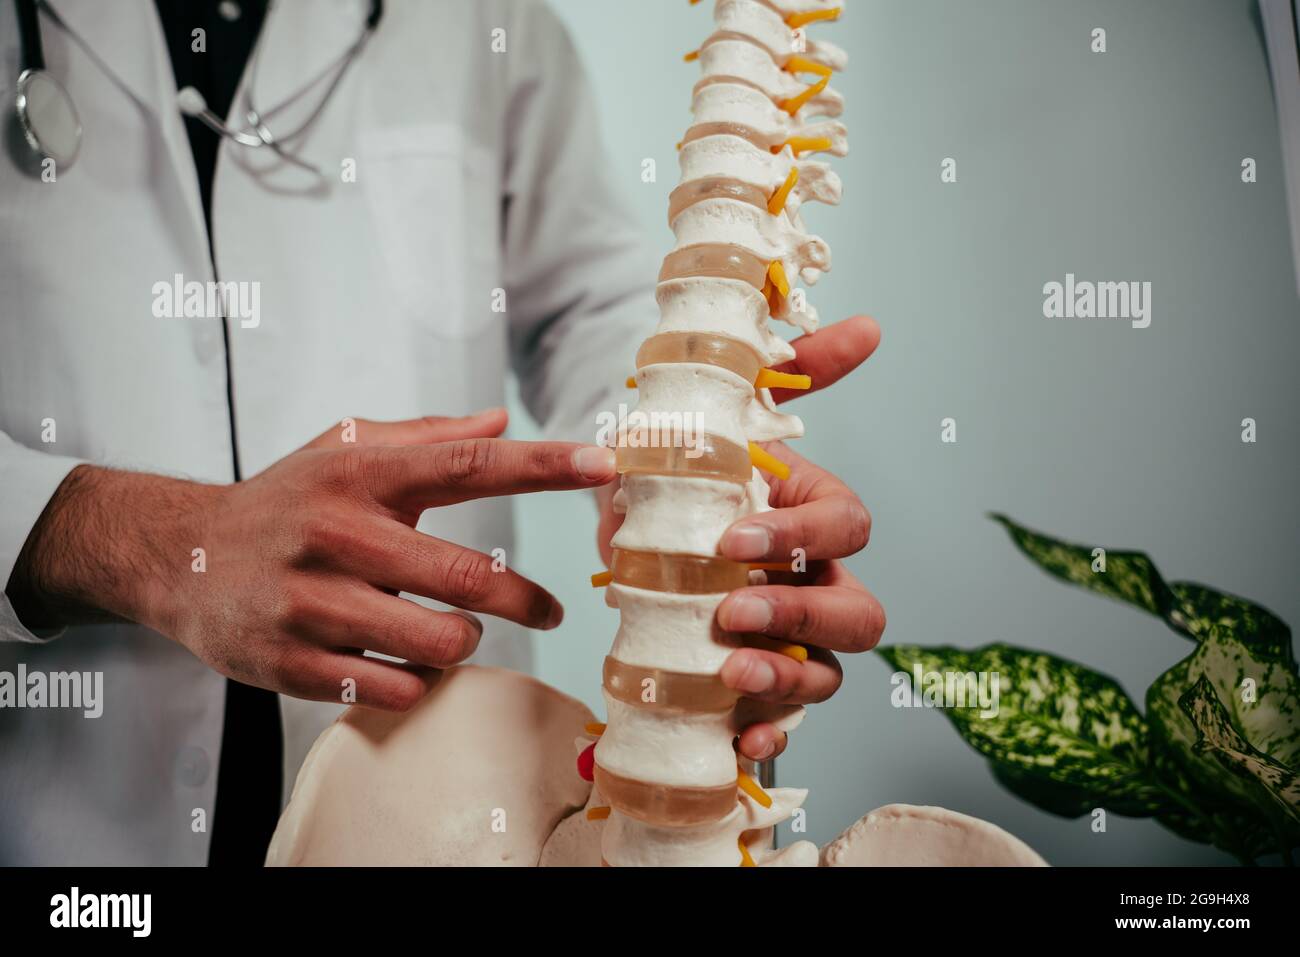 Mixed race male doctor holding skeleton explaining to patient areas of the spine Stock Photo